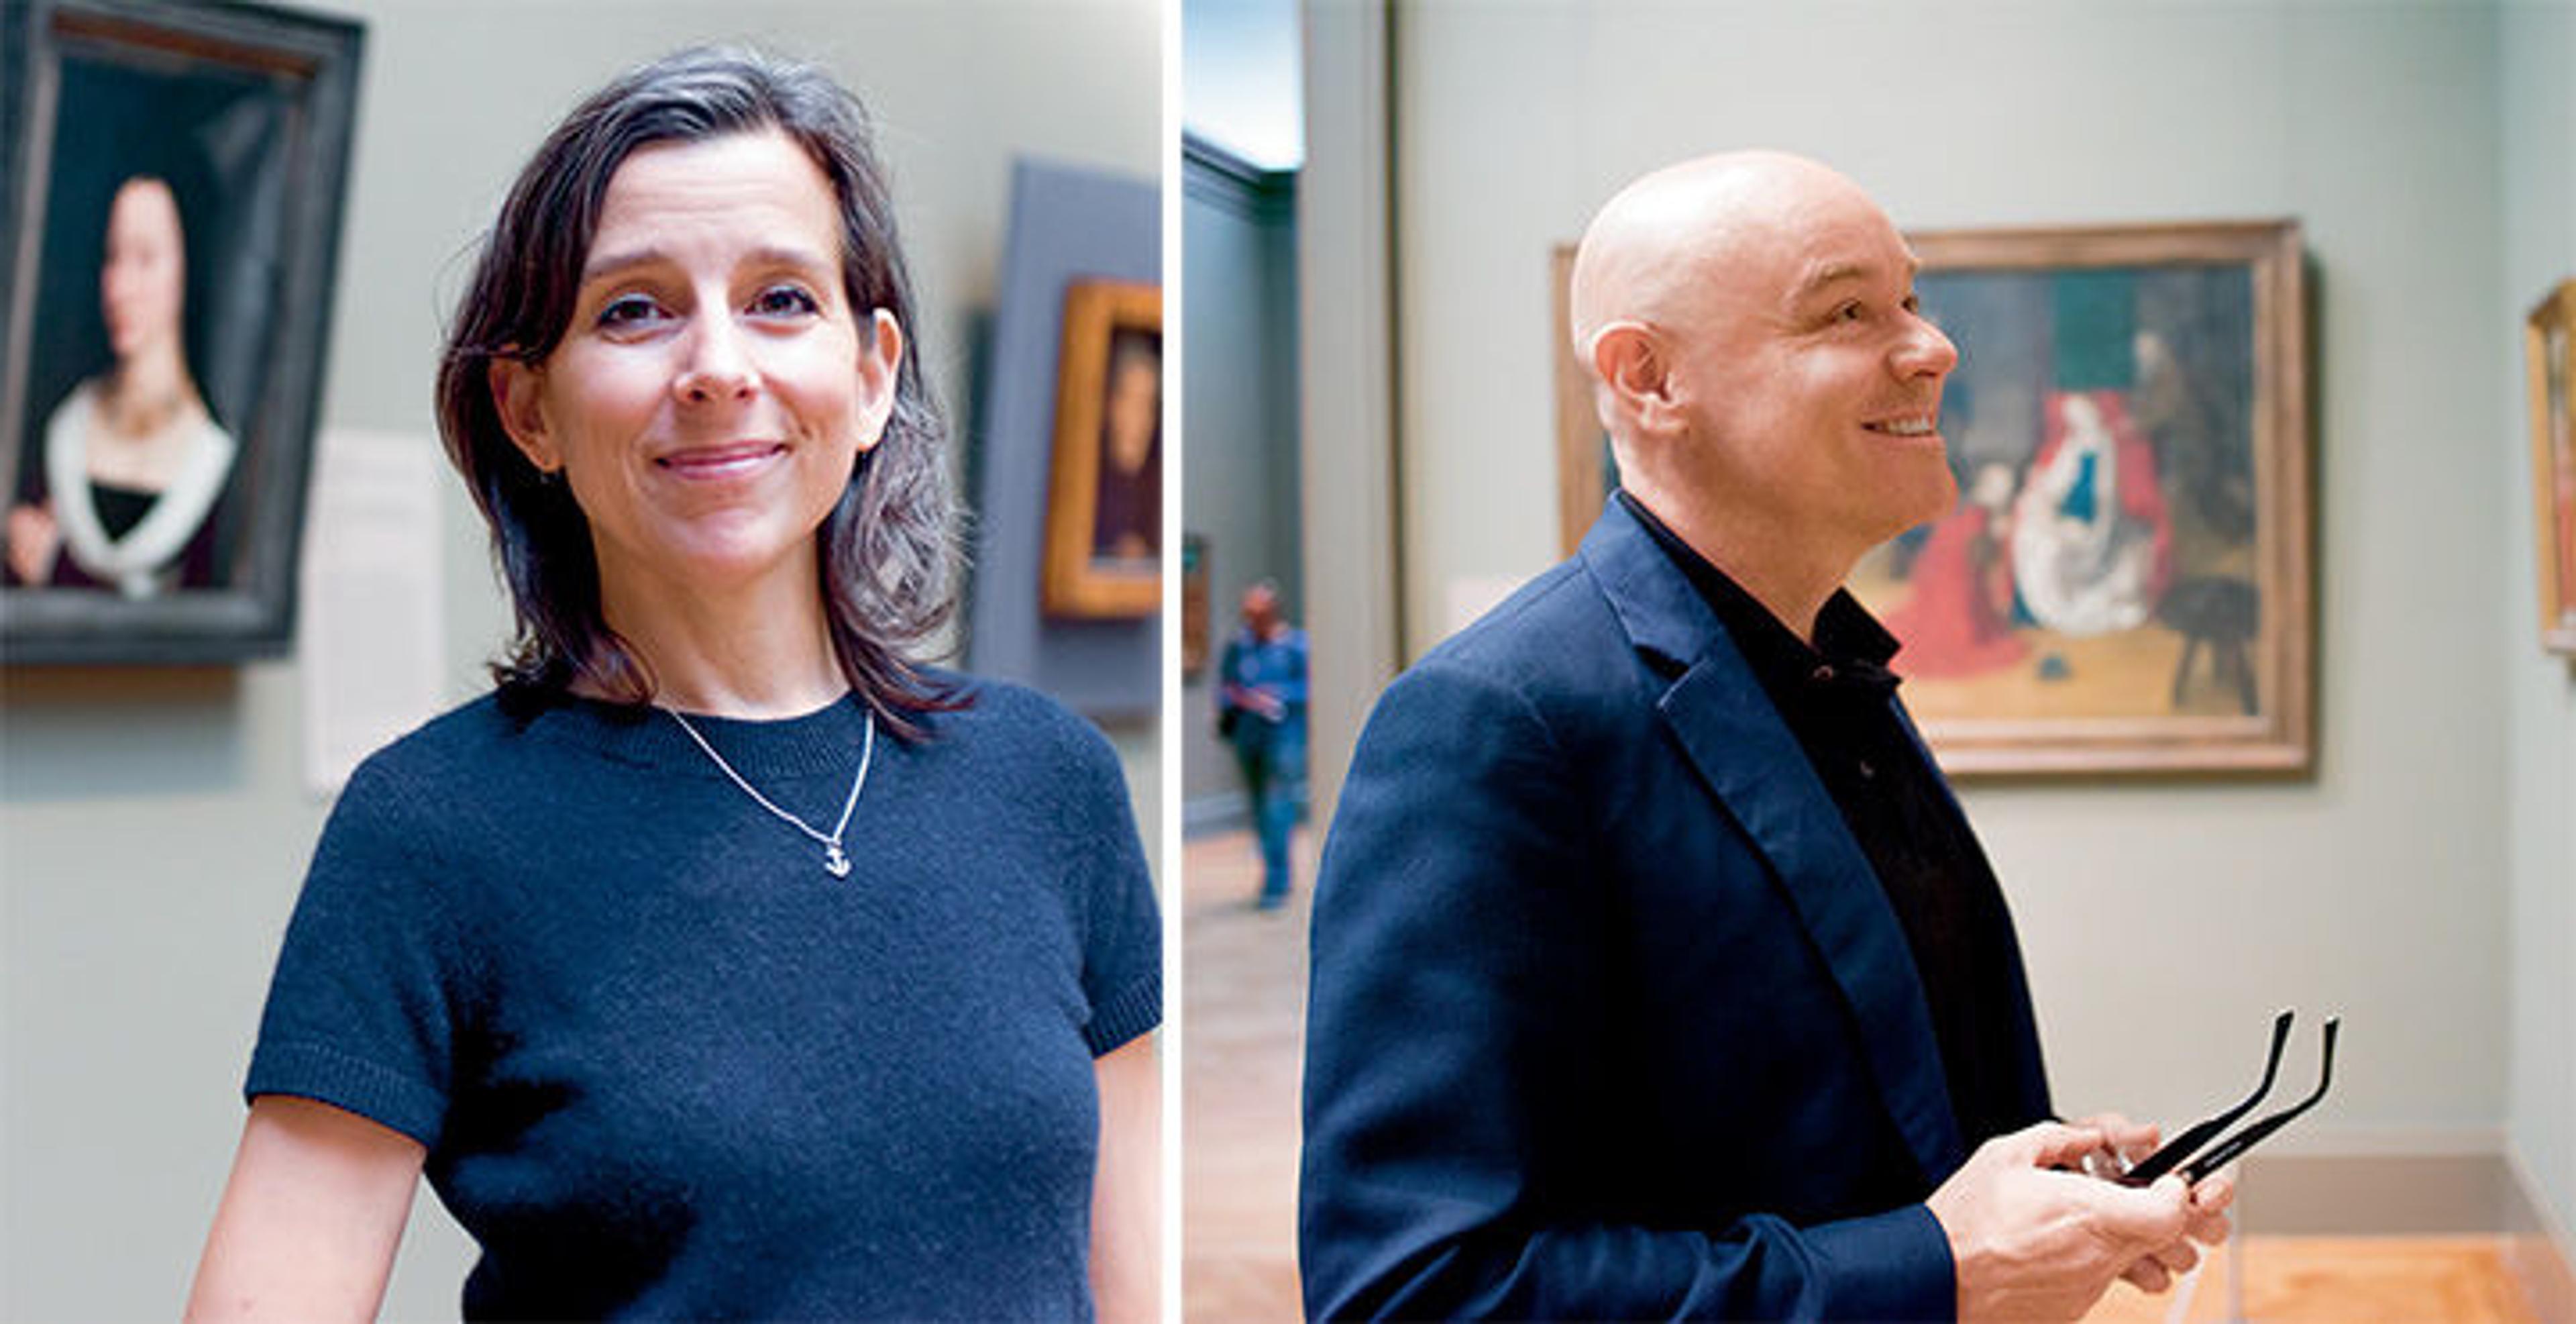 Nina Katchadourian on the left and Walton Ford on the right, both wearing dark blue, with paintings in the background